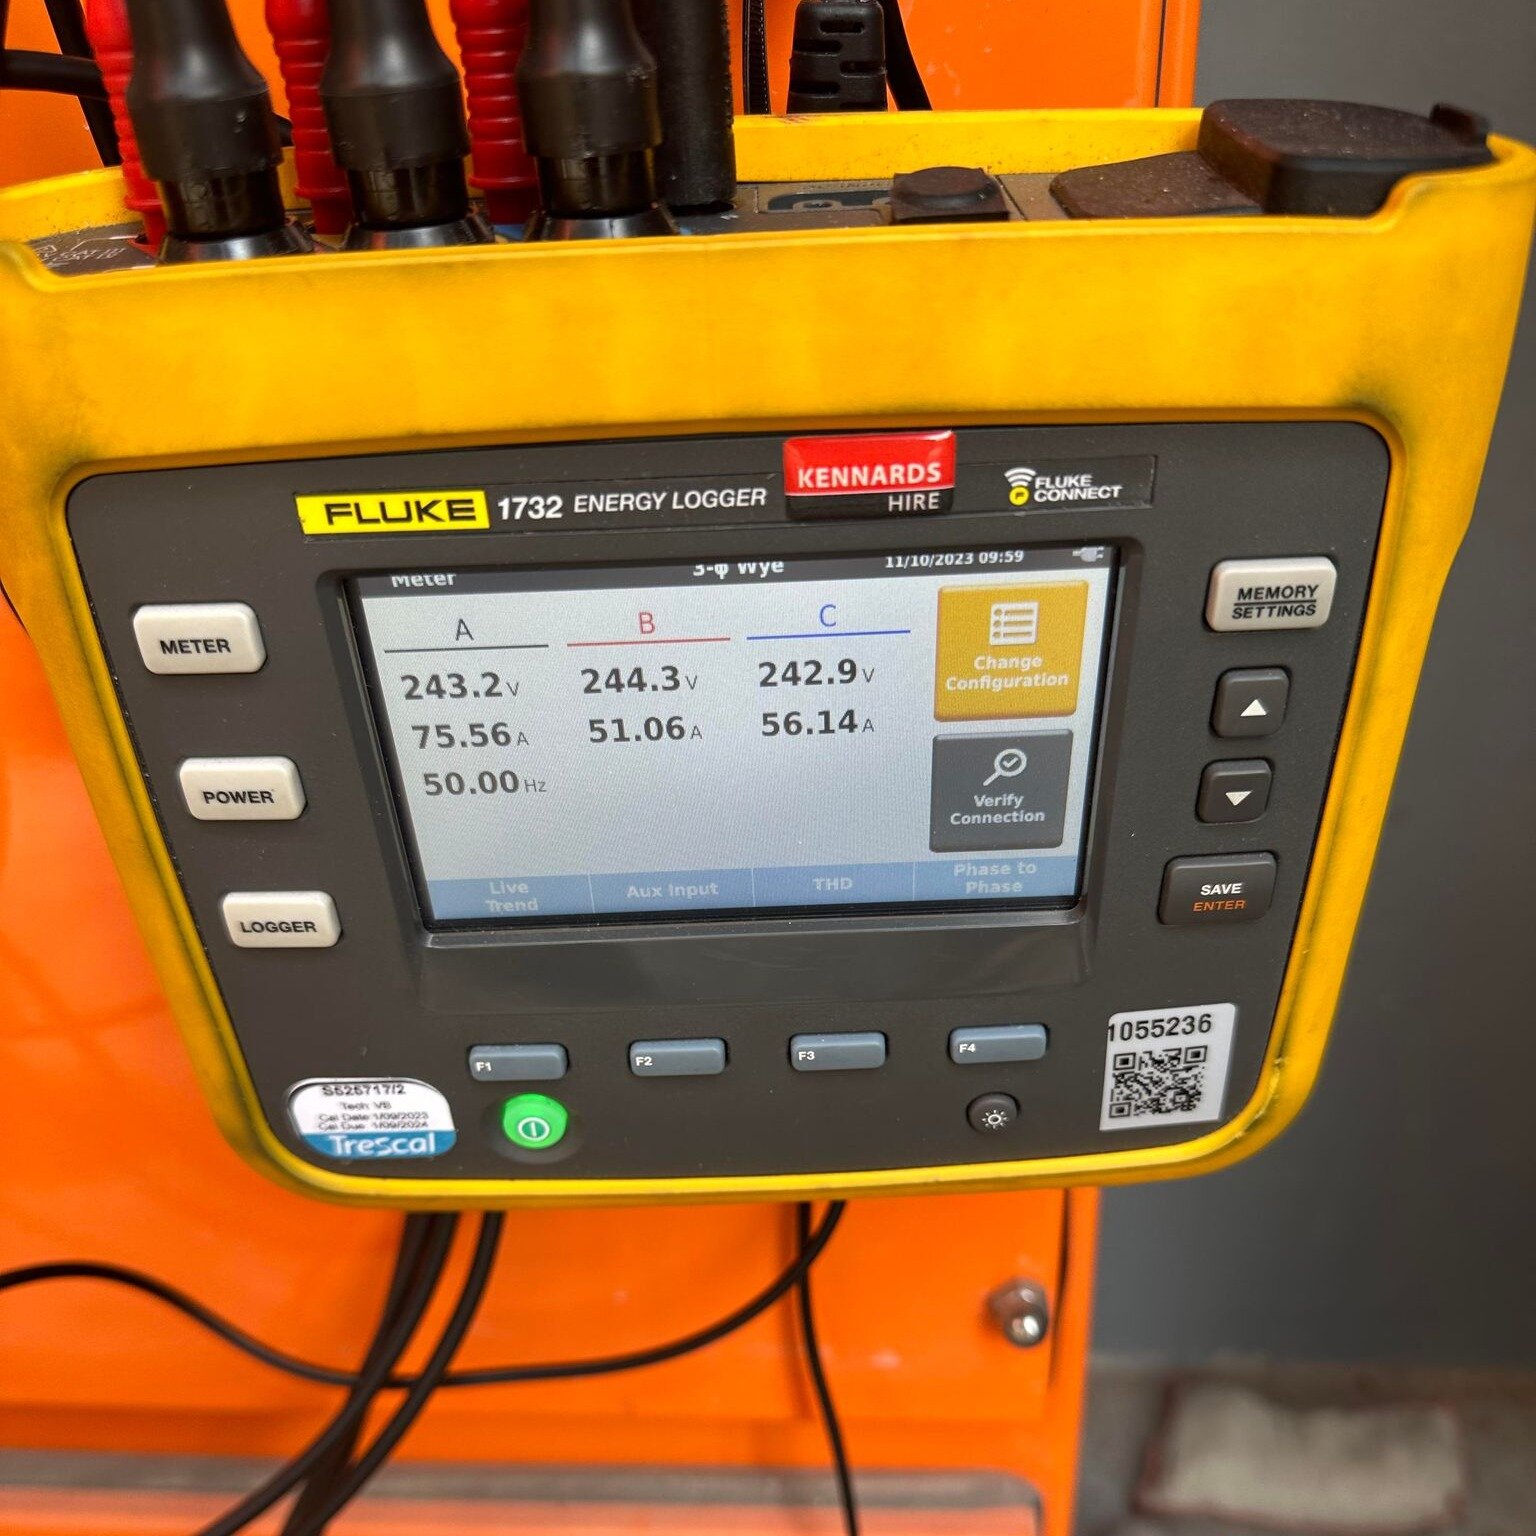 Power monitoring for sub-mains to assess the customer's maximum demand (total power usage). This was completed to see if the customer had enough power to run an new set of sub-mains and be able to supply a new 200Amp switchboard.
#electrician #Facili